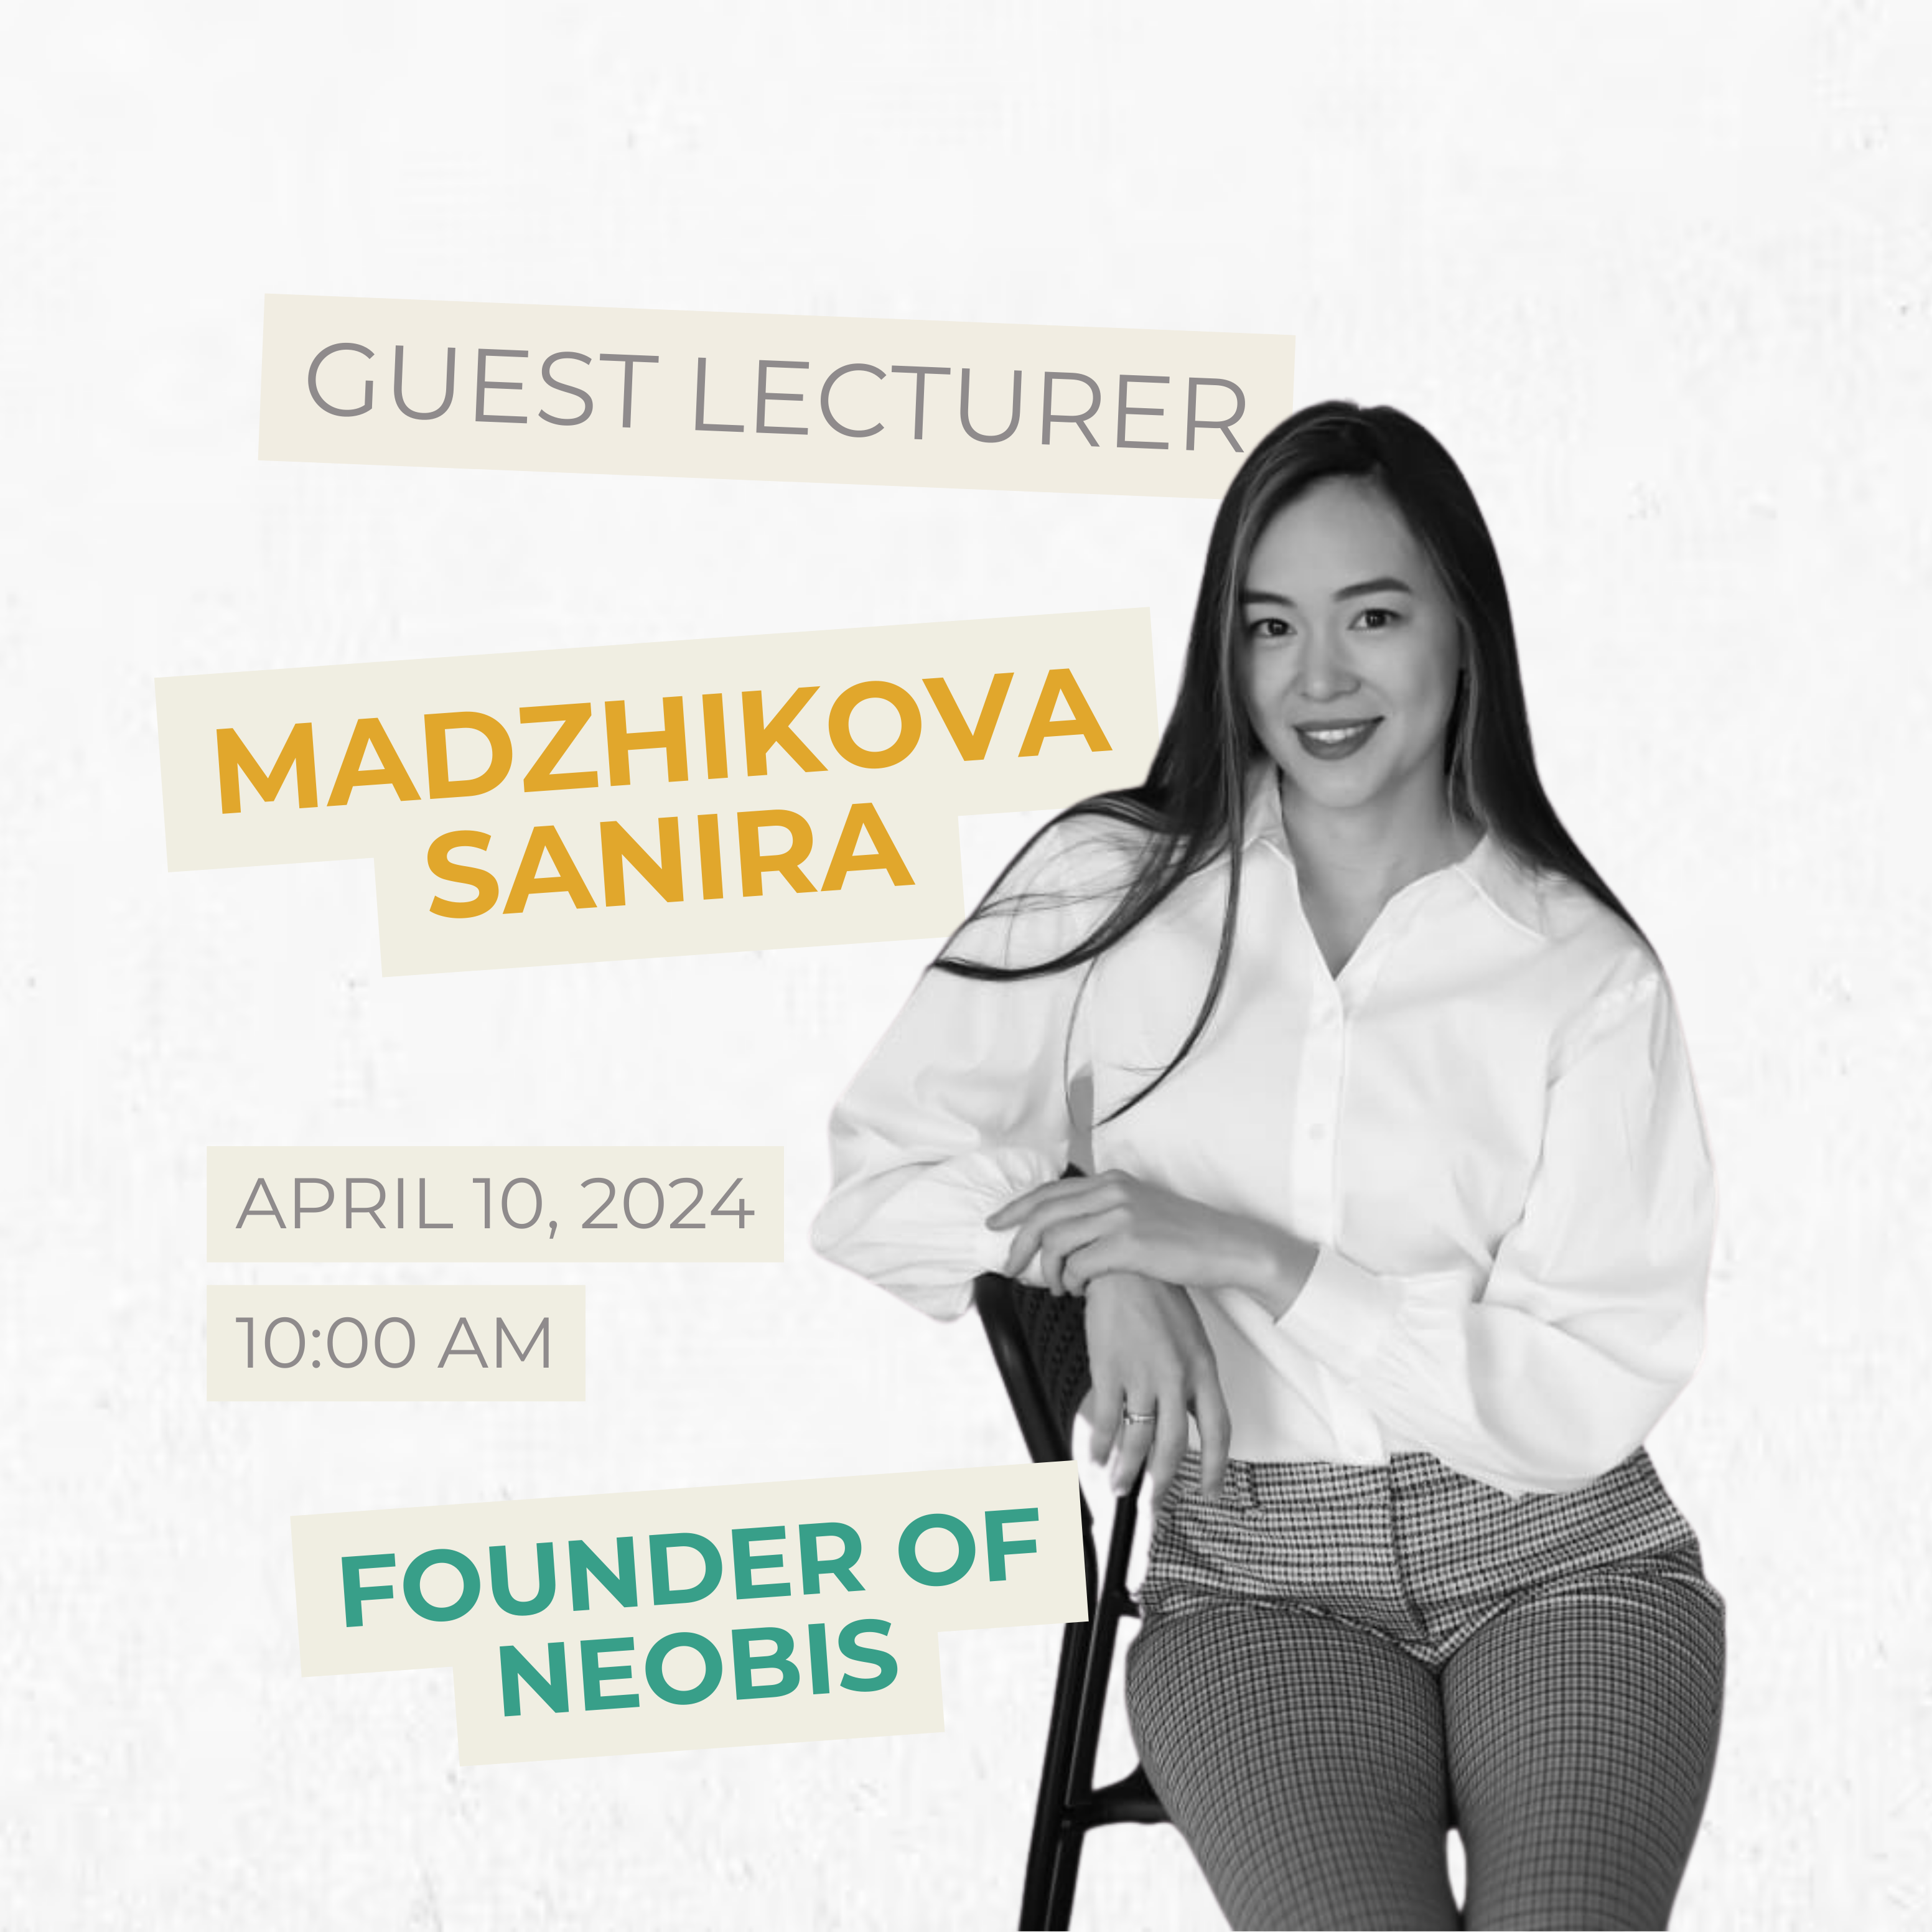 A guest lecture by an expert in the field of IT, the founder of Neobis